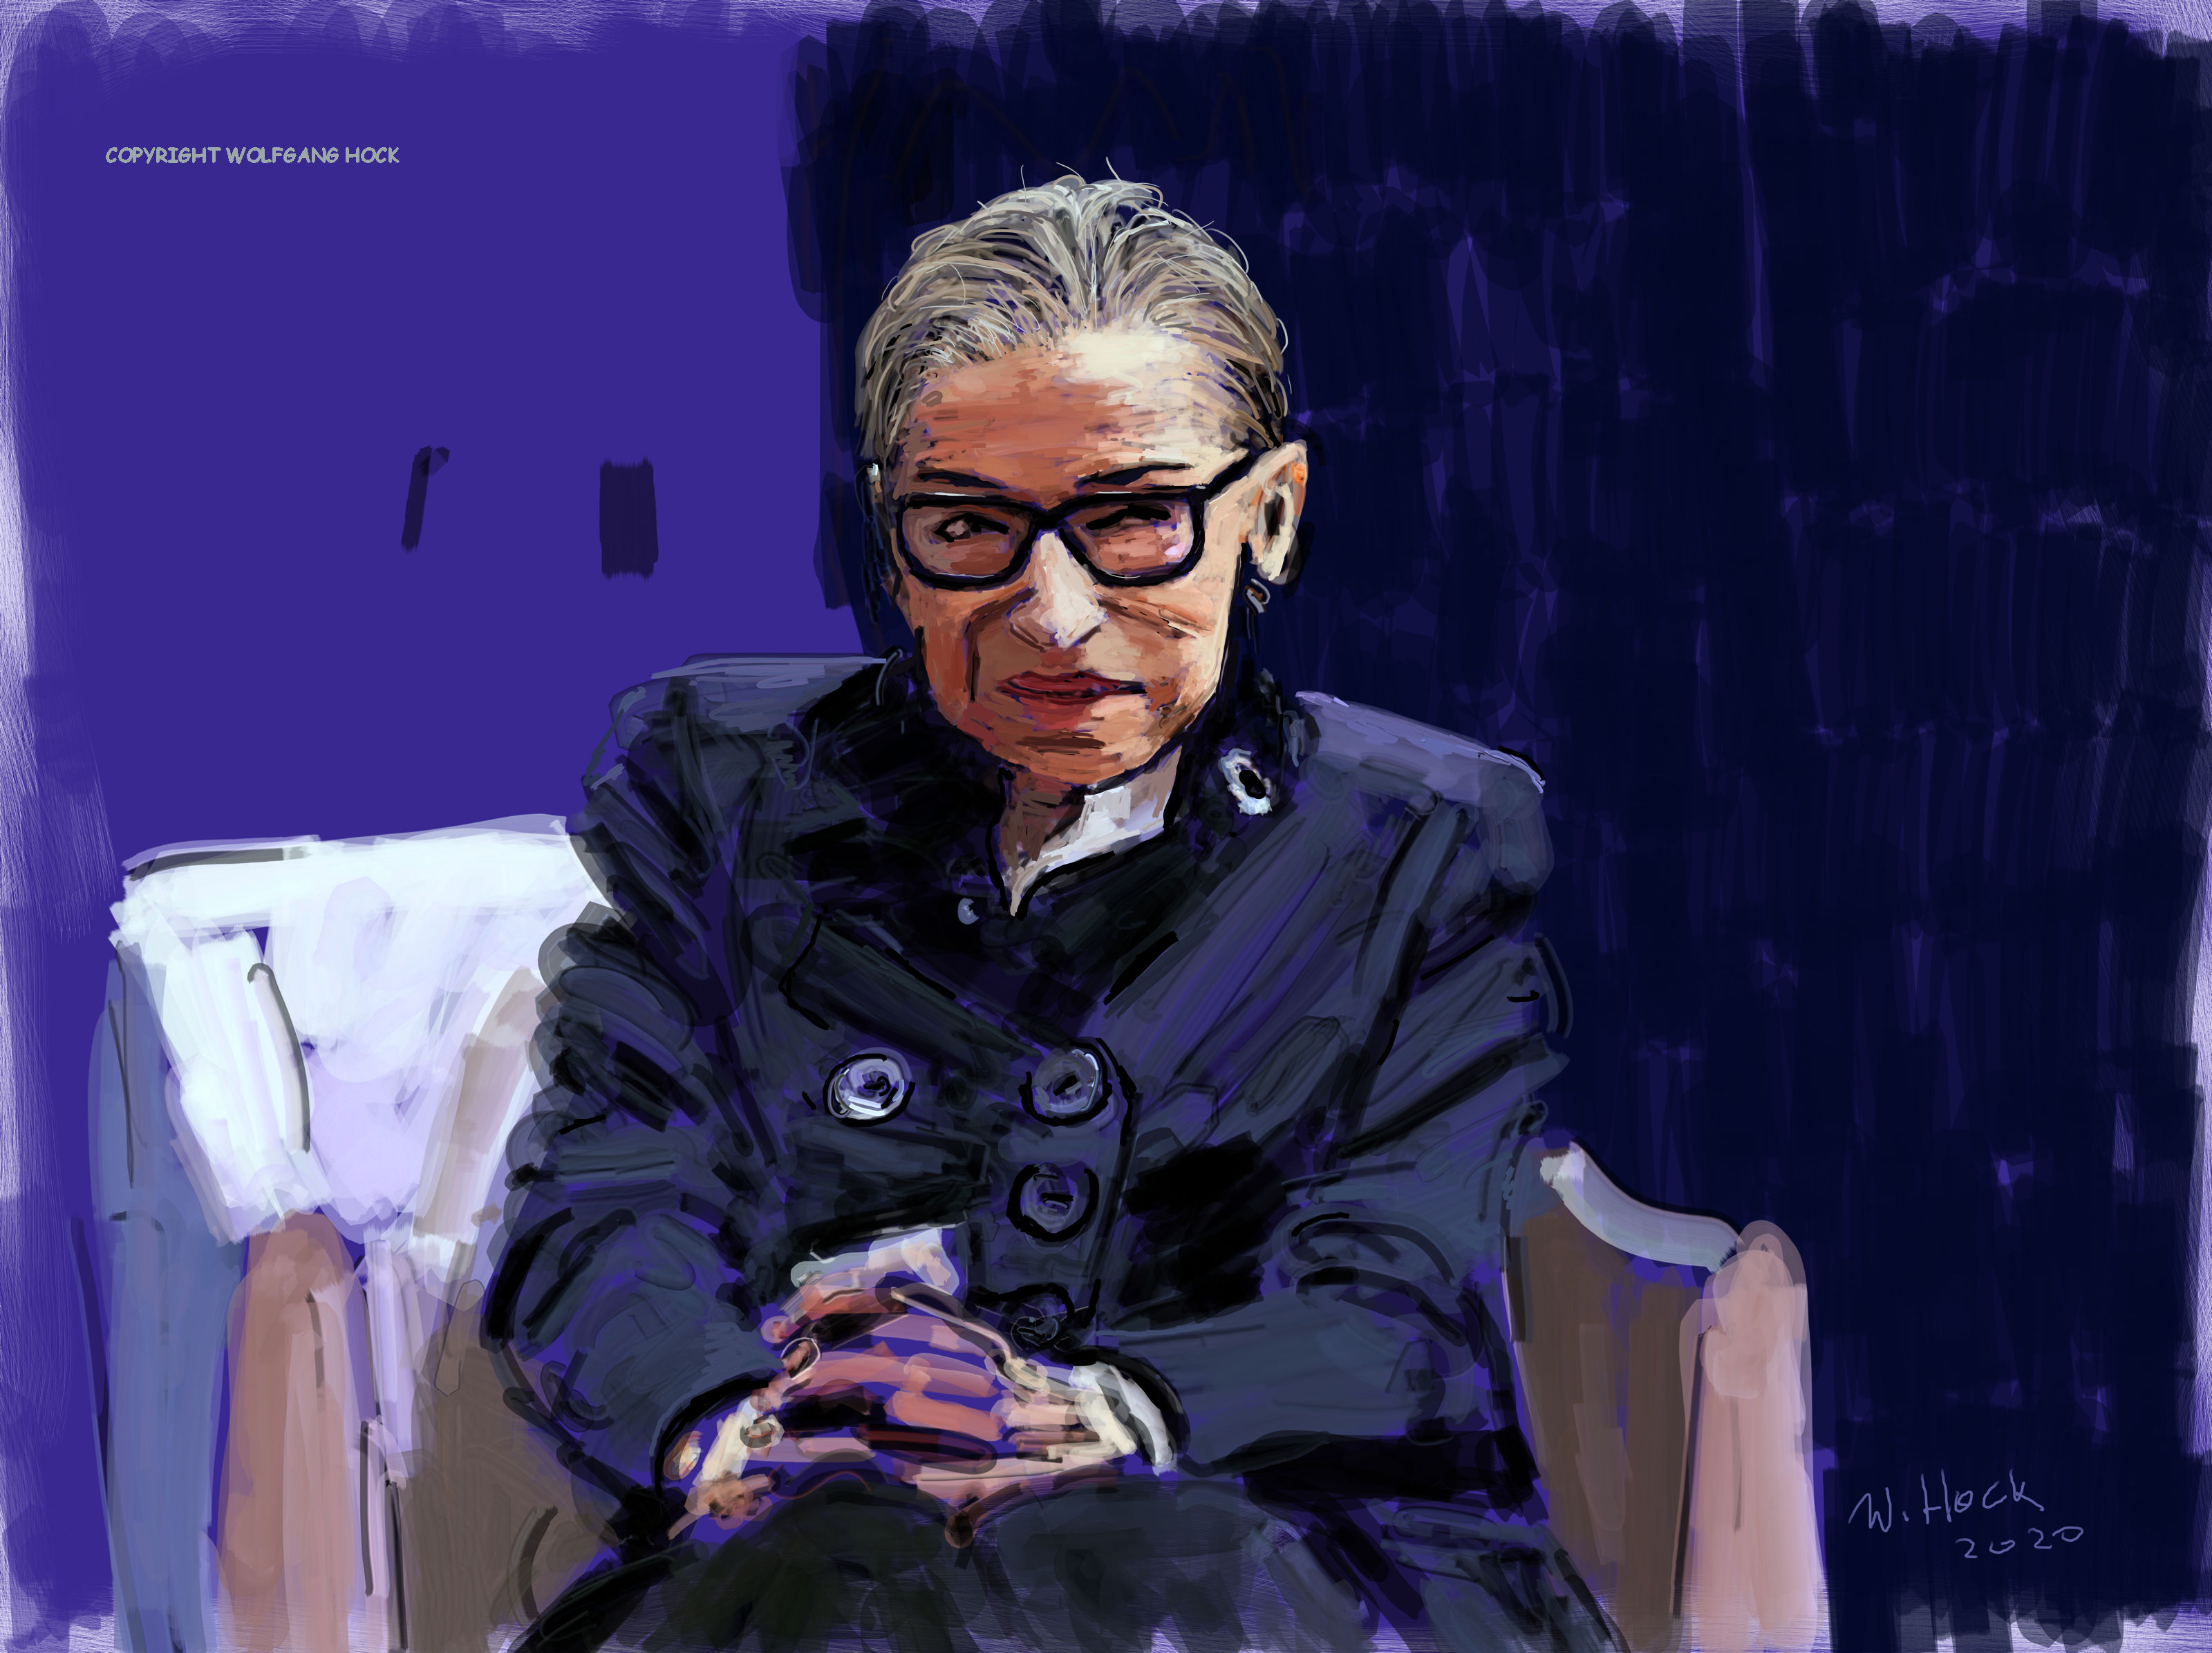 Hommage to Ruth Bader Ginsberg 2020   Handmade digital painting on canvas 135 x 100 cm (201 megapixels)